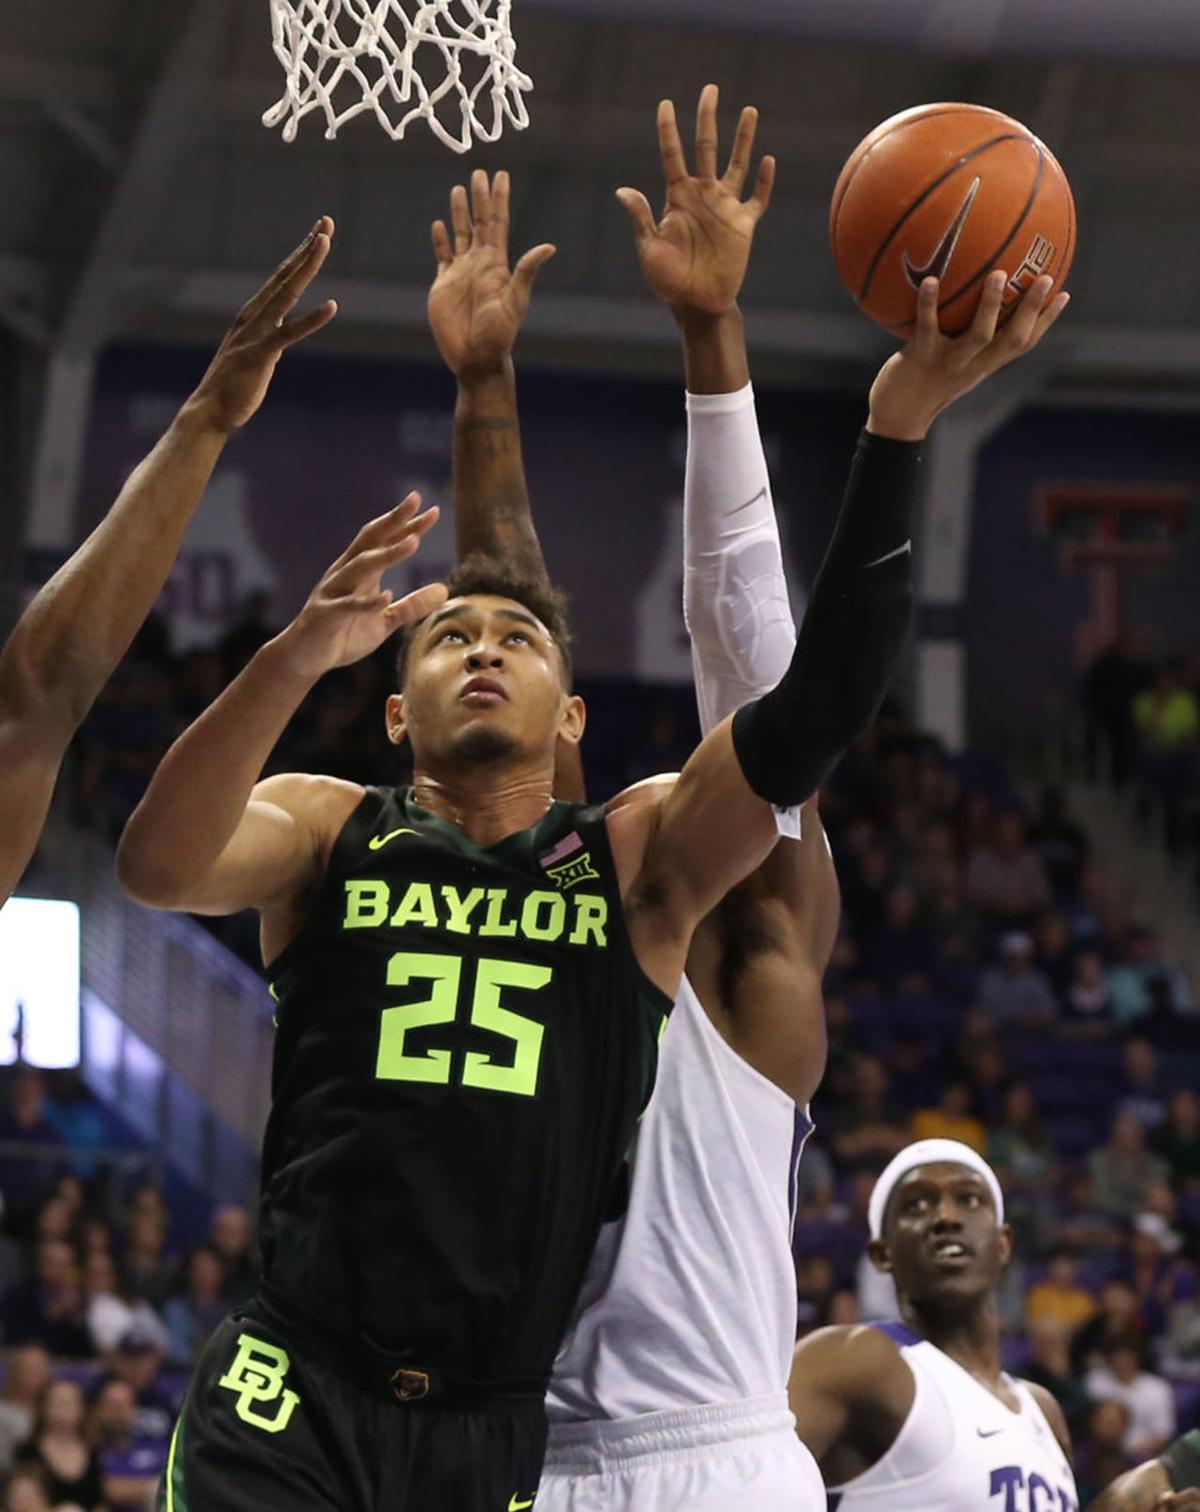 Experienced Baylor Men Drew Have High Expectations Baylor Wacotrib Com